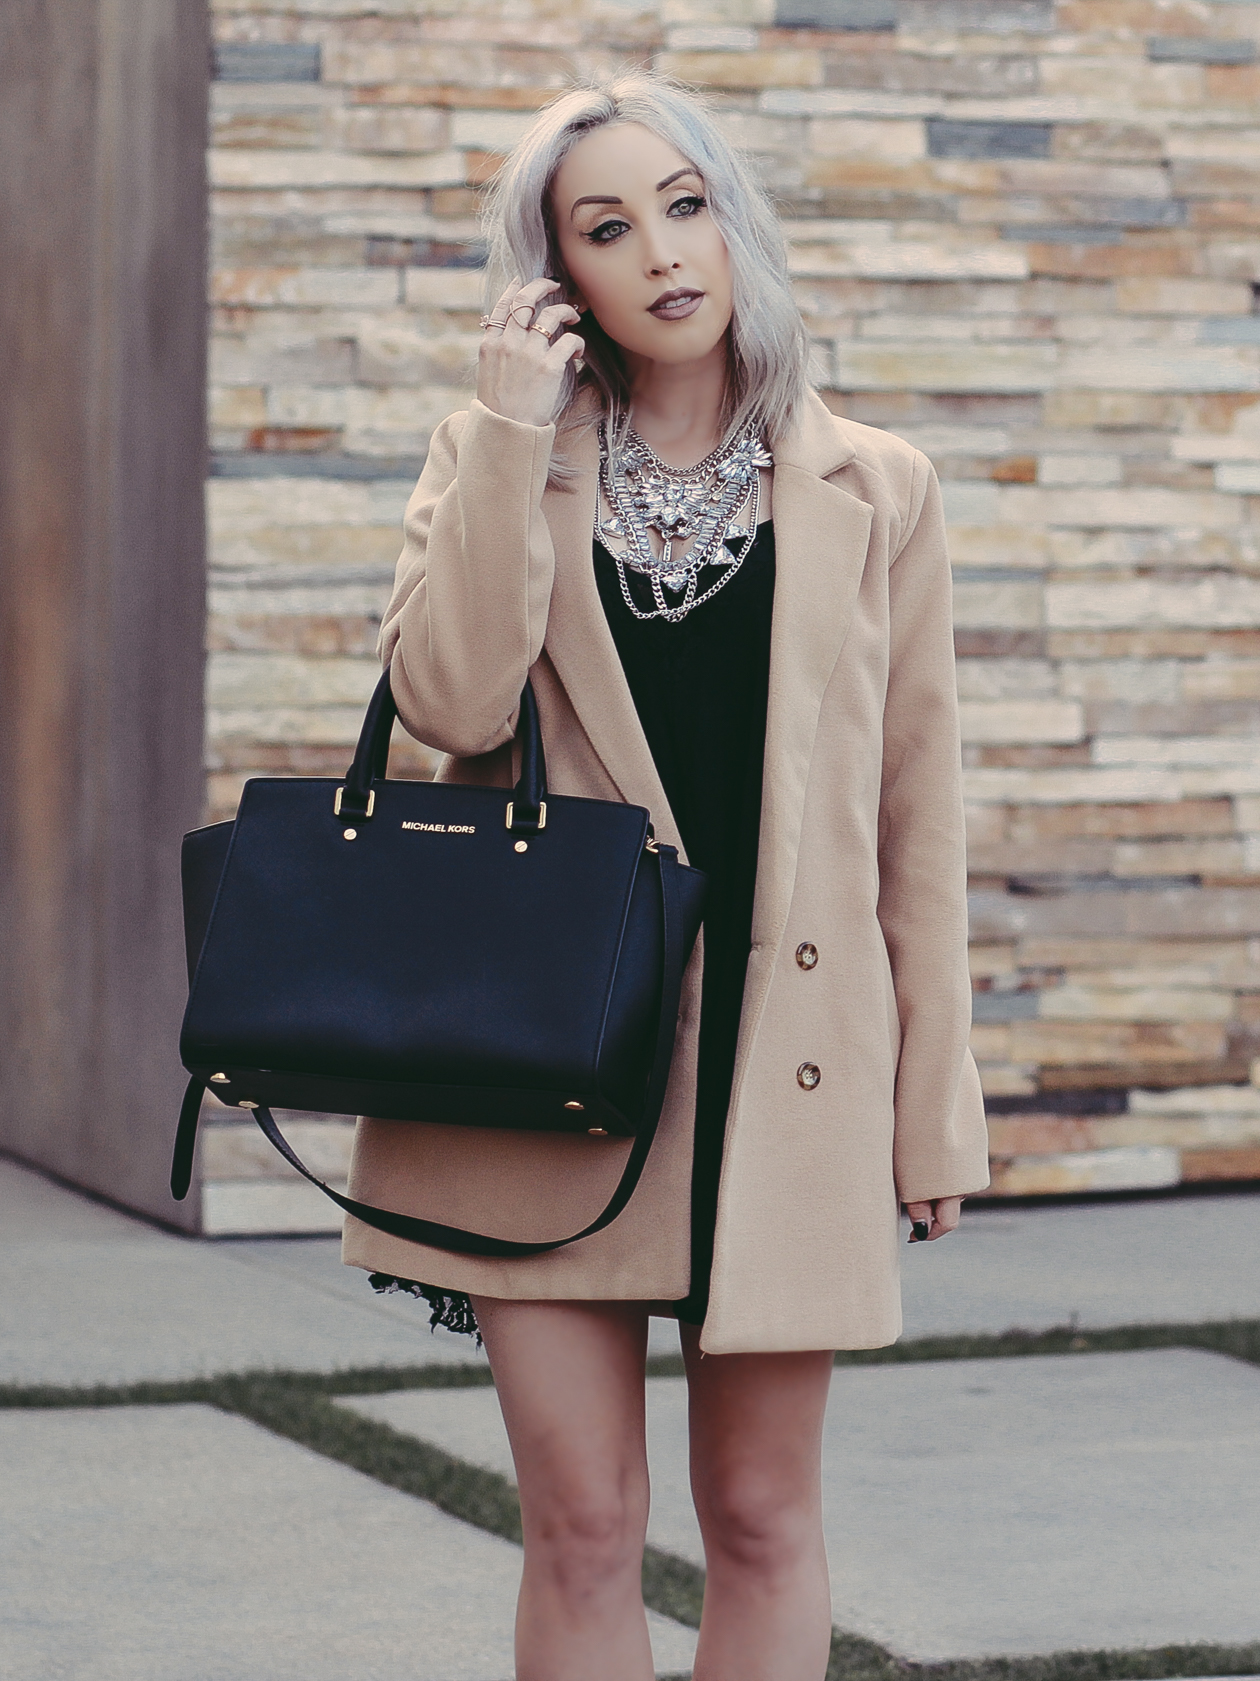 Camel Trench Coat, Black Babydoll Dress, Statement Necklace by @happinessbtq | BlondieintheCity.com